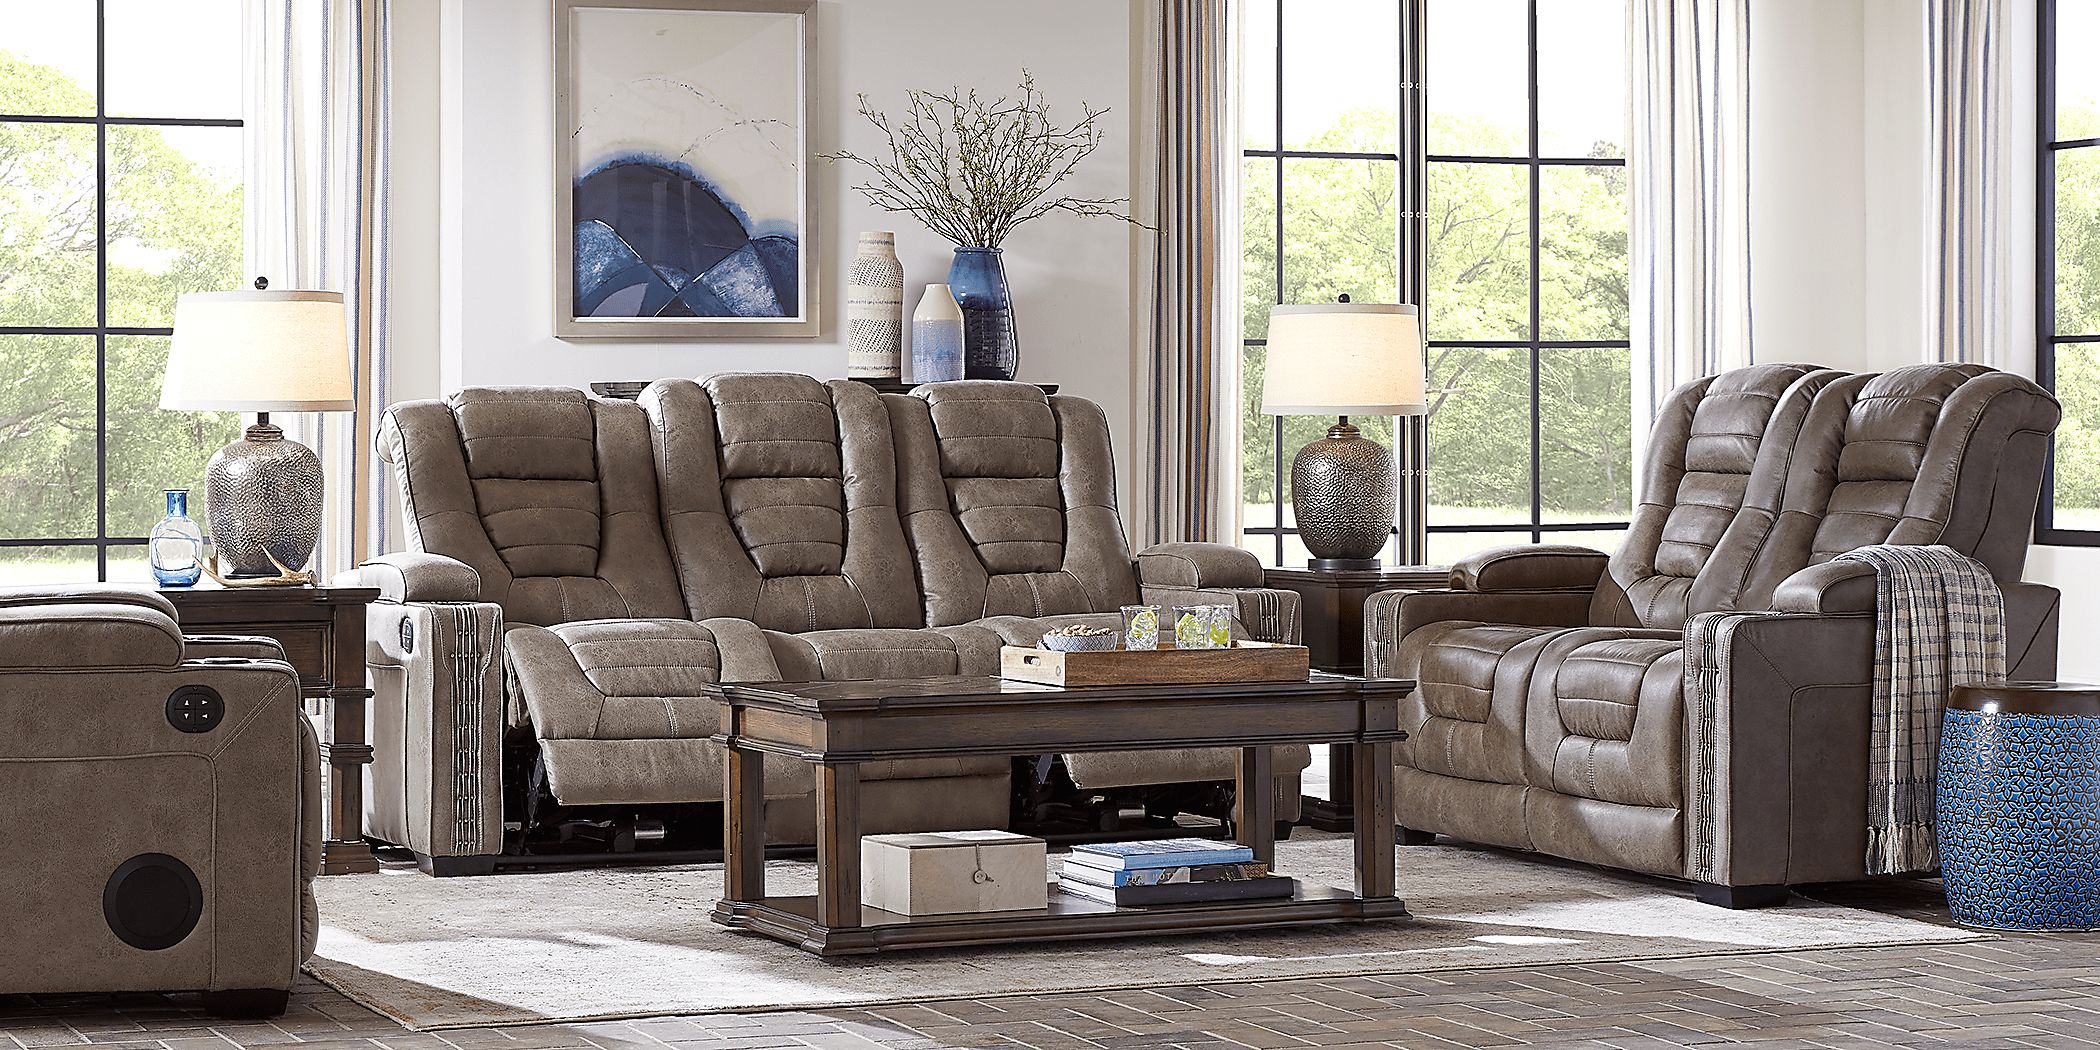 Eric Church Highway To Home Chief Taupe 2 Pc Living Room with Dual Power Reclining Sofa